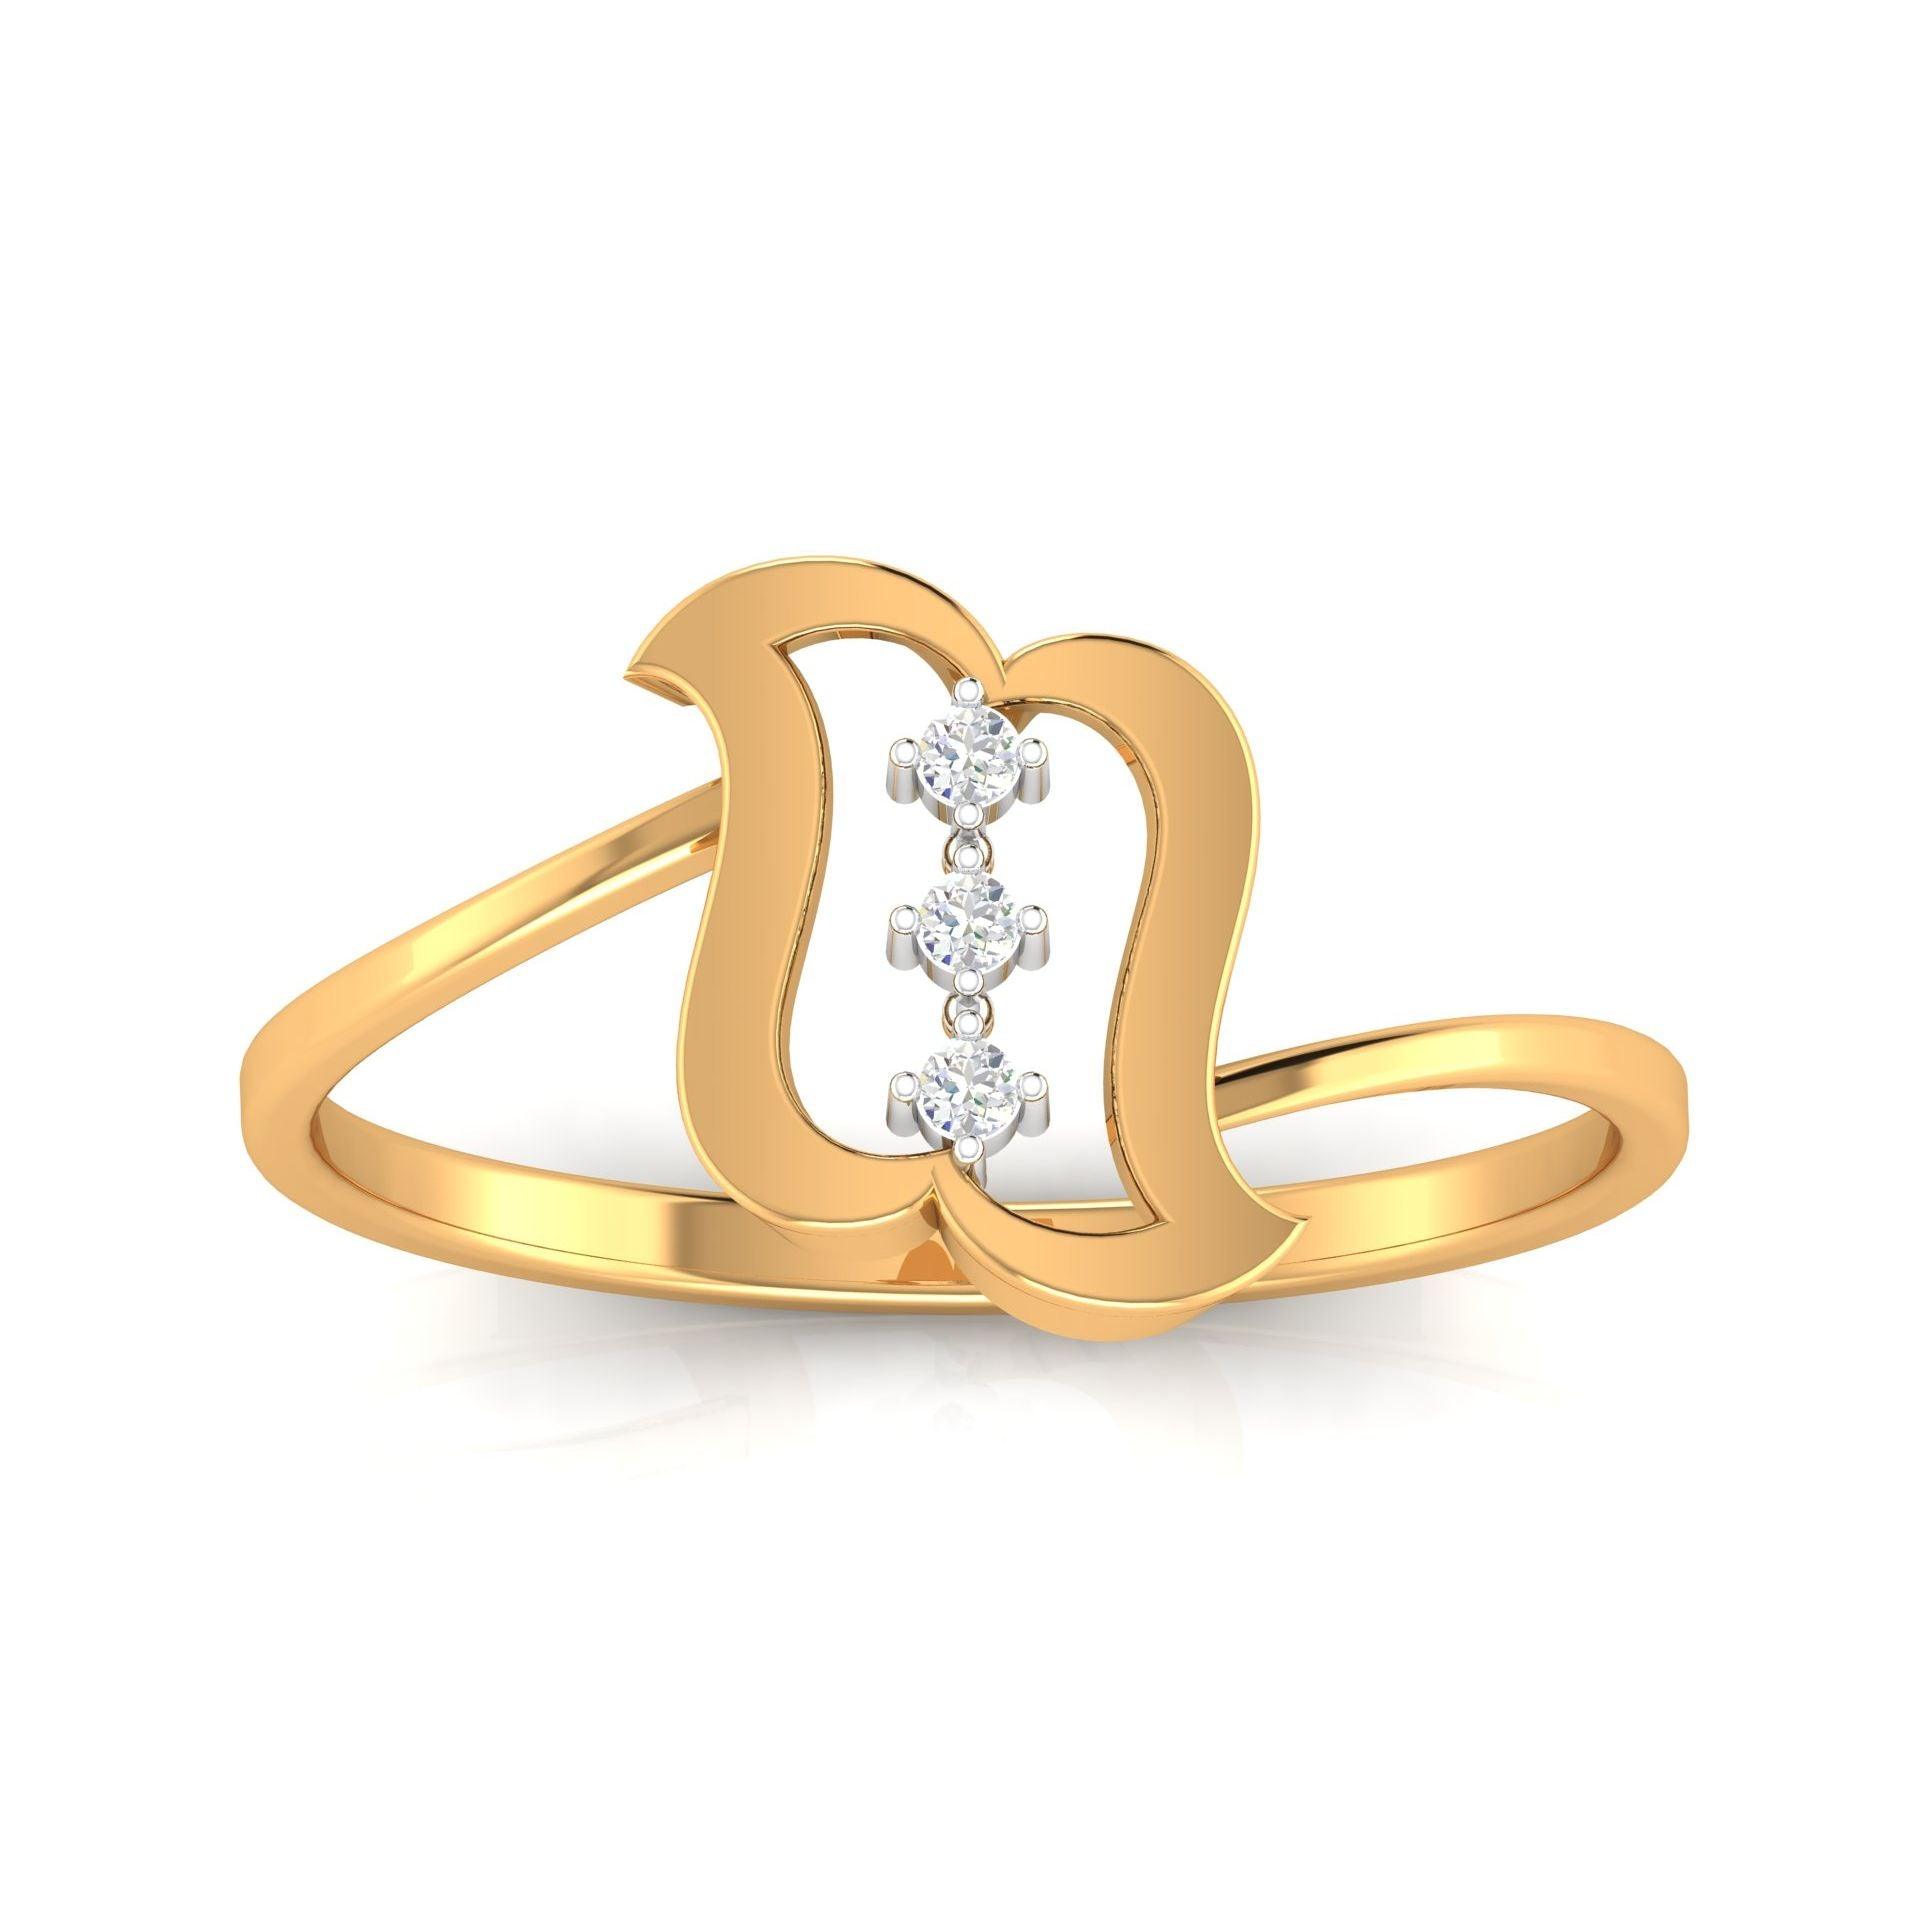 925 Sterling Silver Classic Treasures with Antique Appeal Gold-Plated Ring AUS-368 - Auory